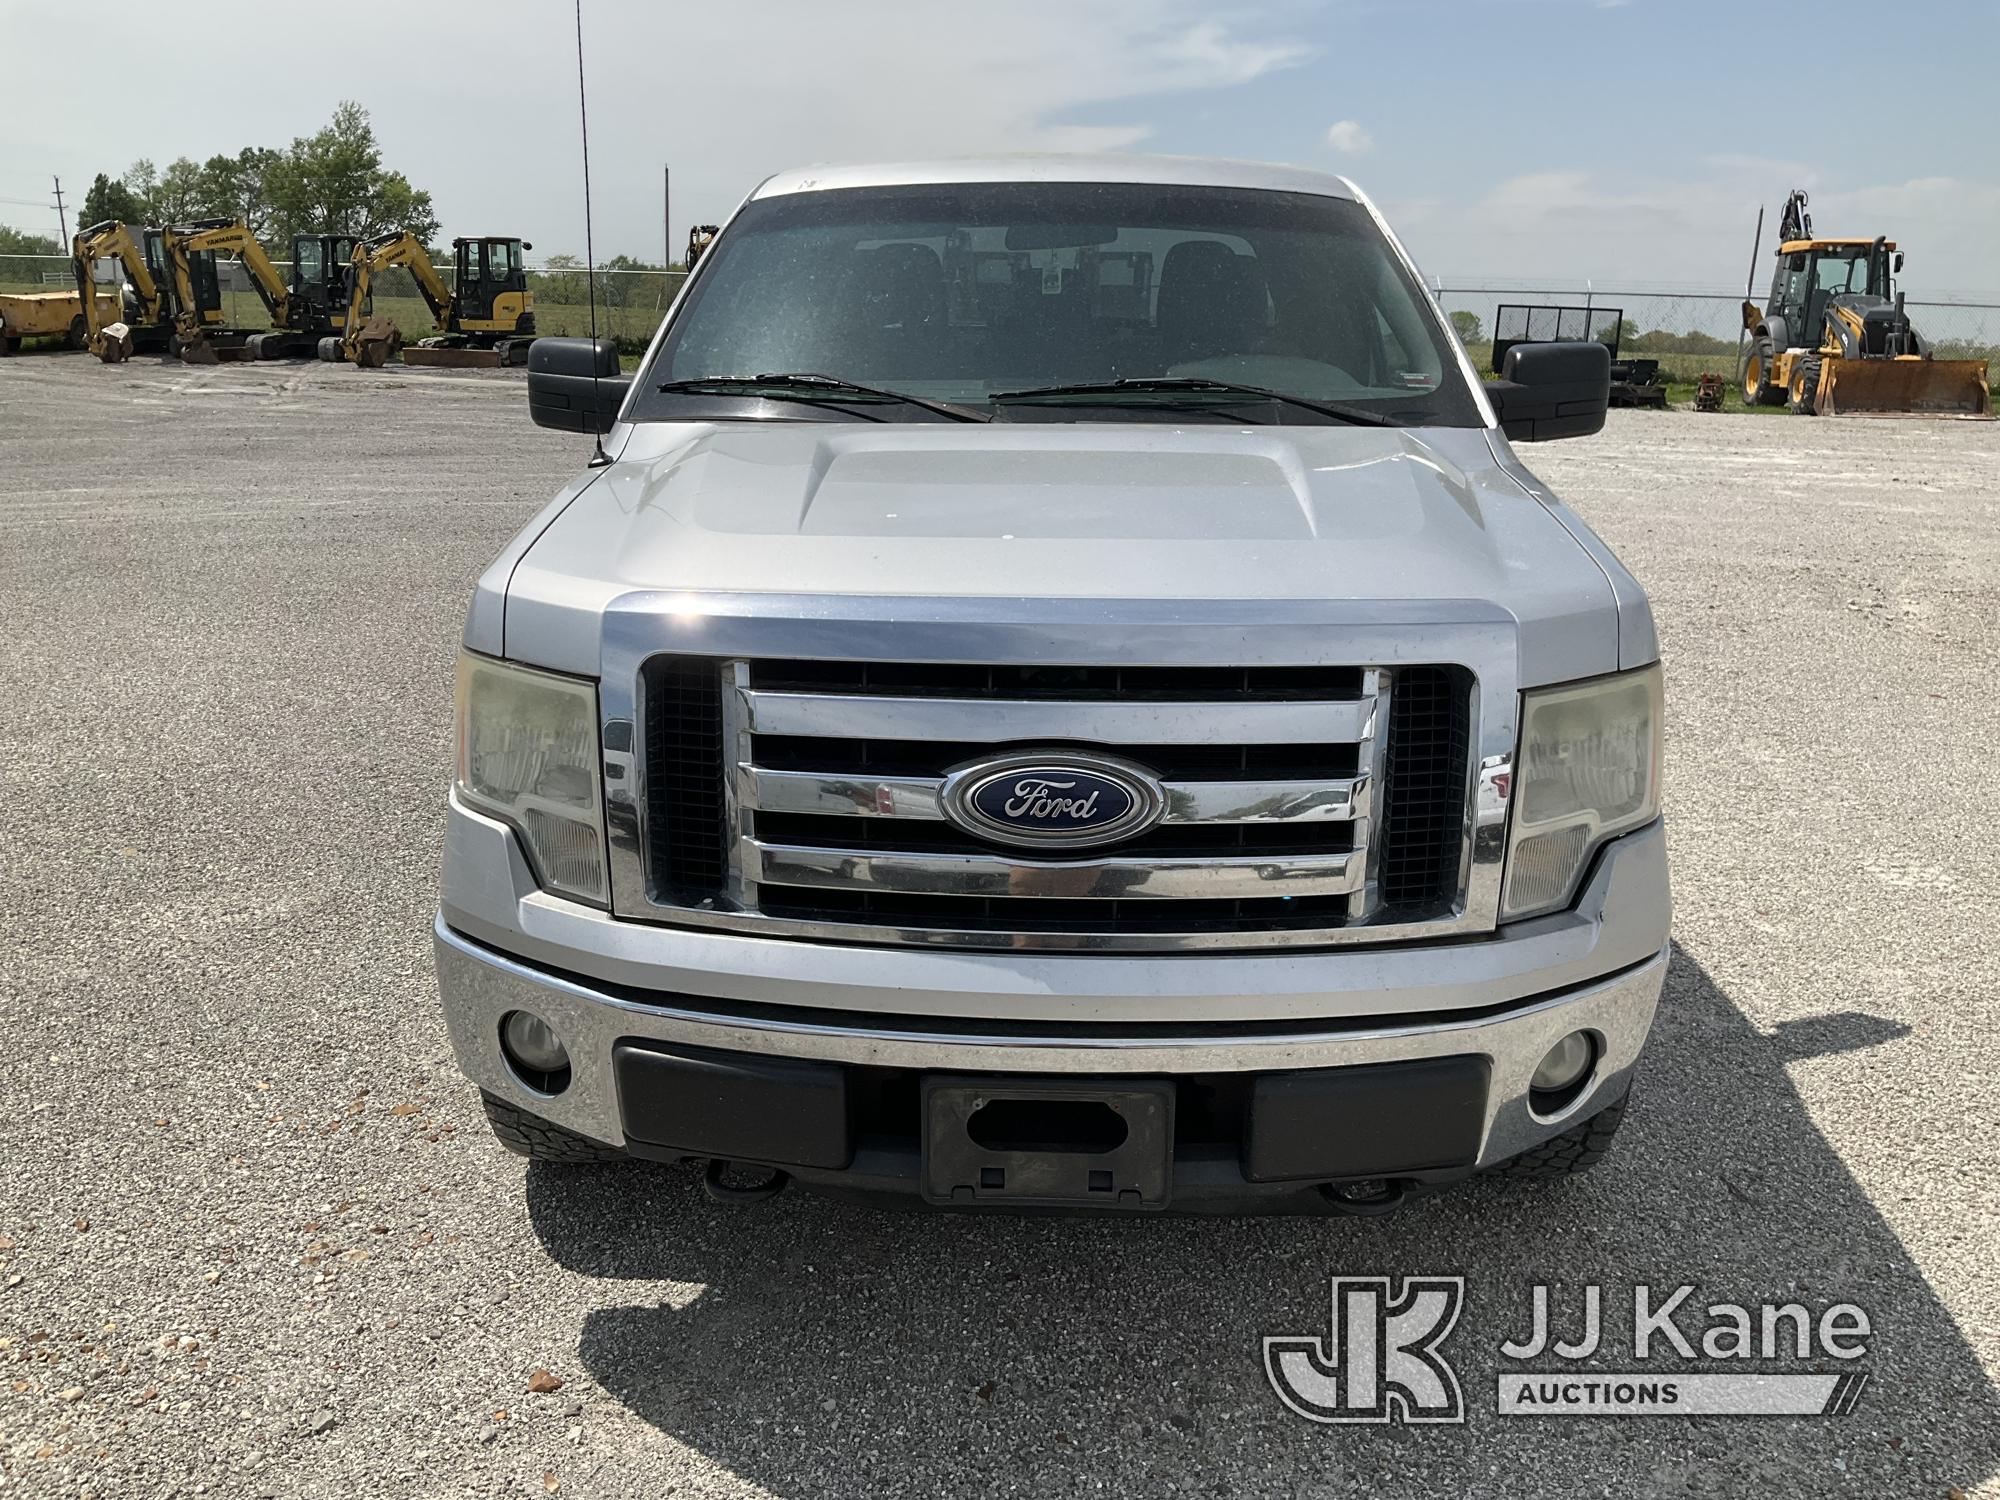 (Hawk Point, MO) 2011 Ford F150 4x4 Extended-Cab Pickup Truck Runs & Moves) (Check Engine Light On,